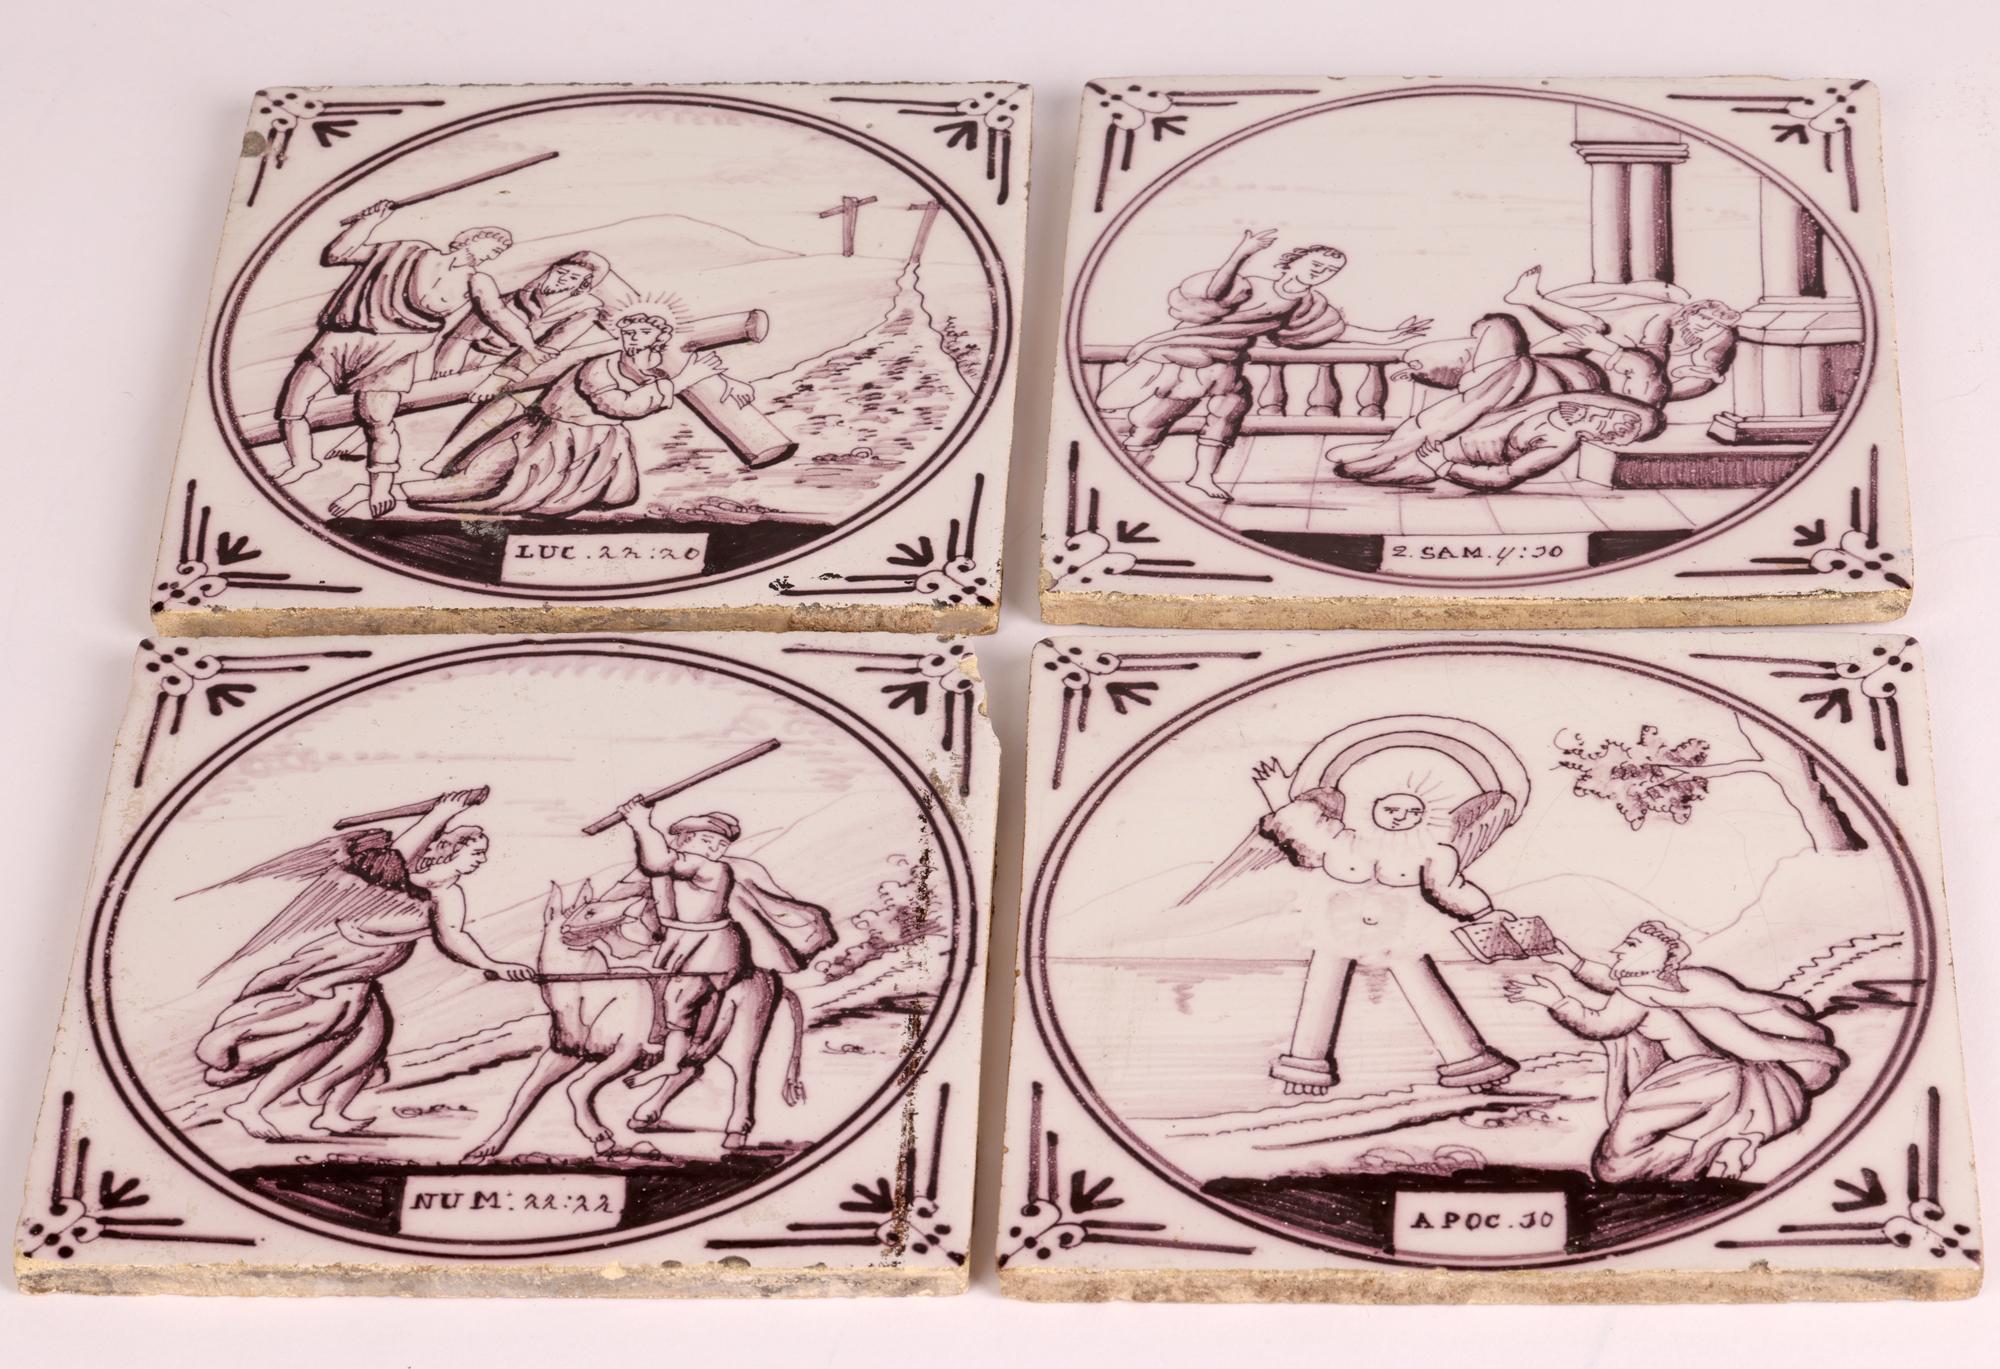 Set Four Dutch Manganese Biblical Pottery Tiles, 18th Century In Good Condition For Sale In Bishop's Stortford, Hertfordshire